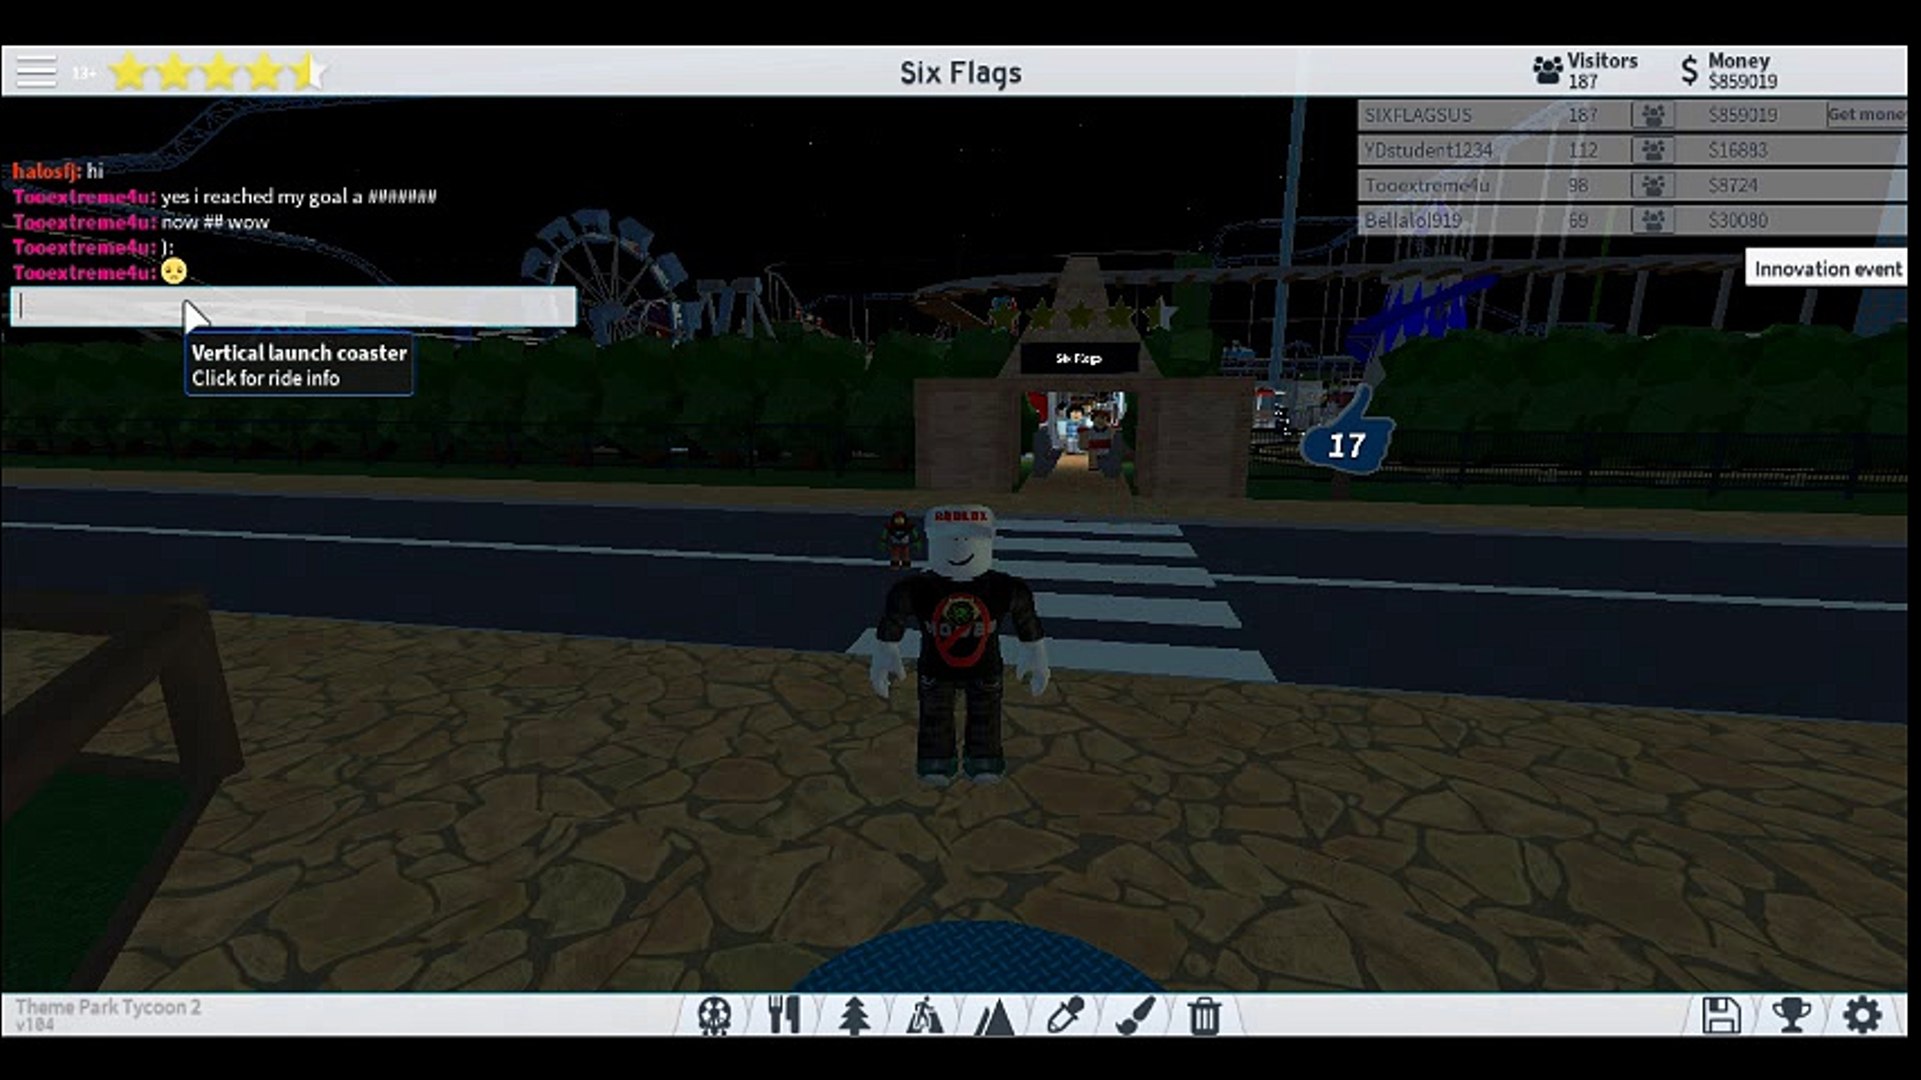 Theme Park Tycoon 2 Tour S4 Episode 1 Six Flags Video Dailymotion - riding my own rides theme park tycoon 2 roblox